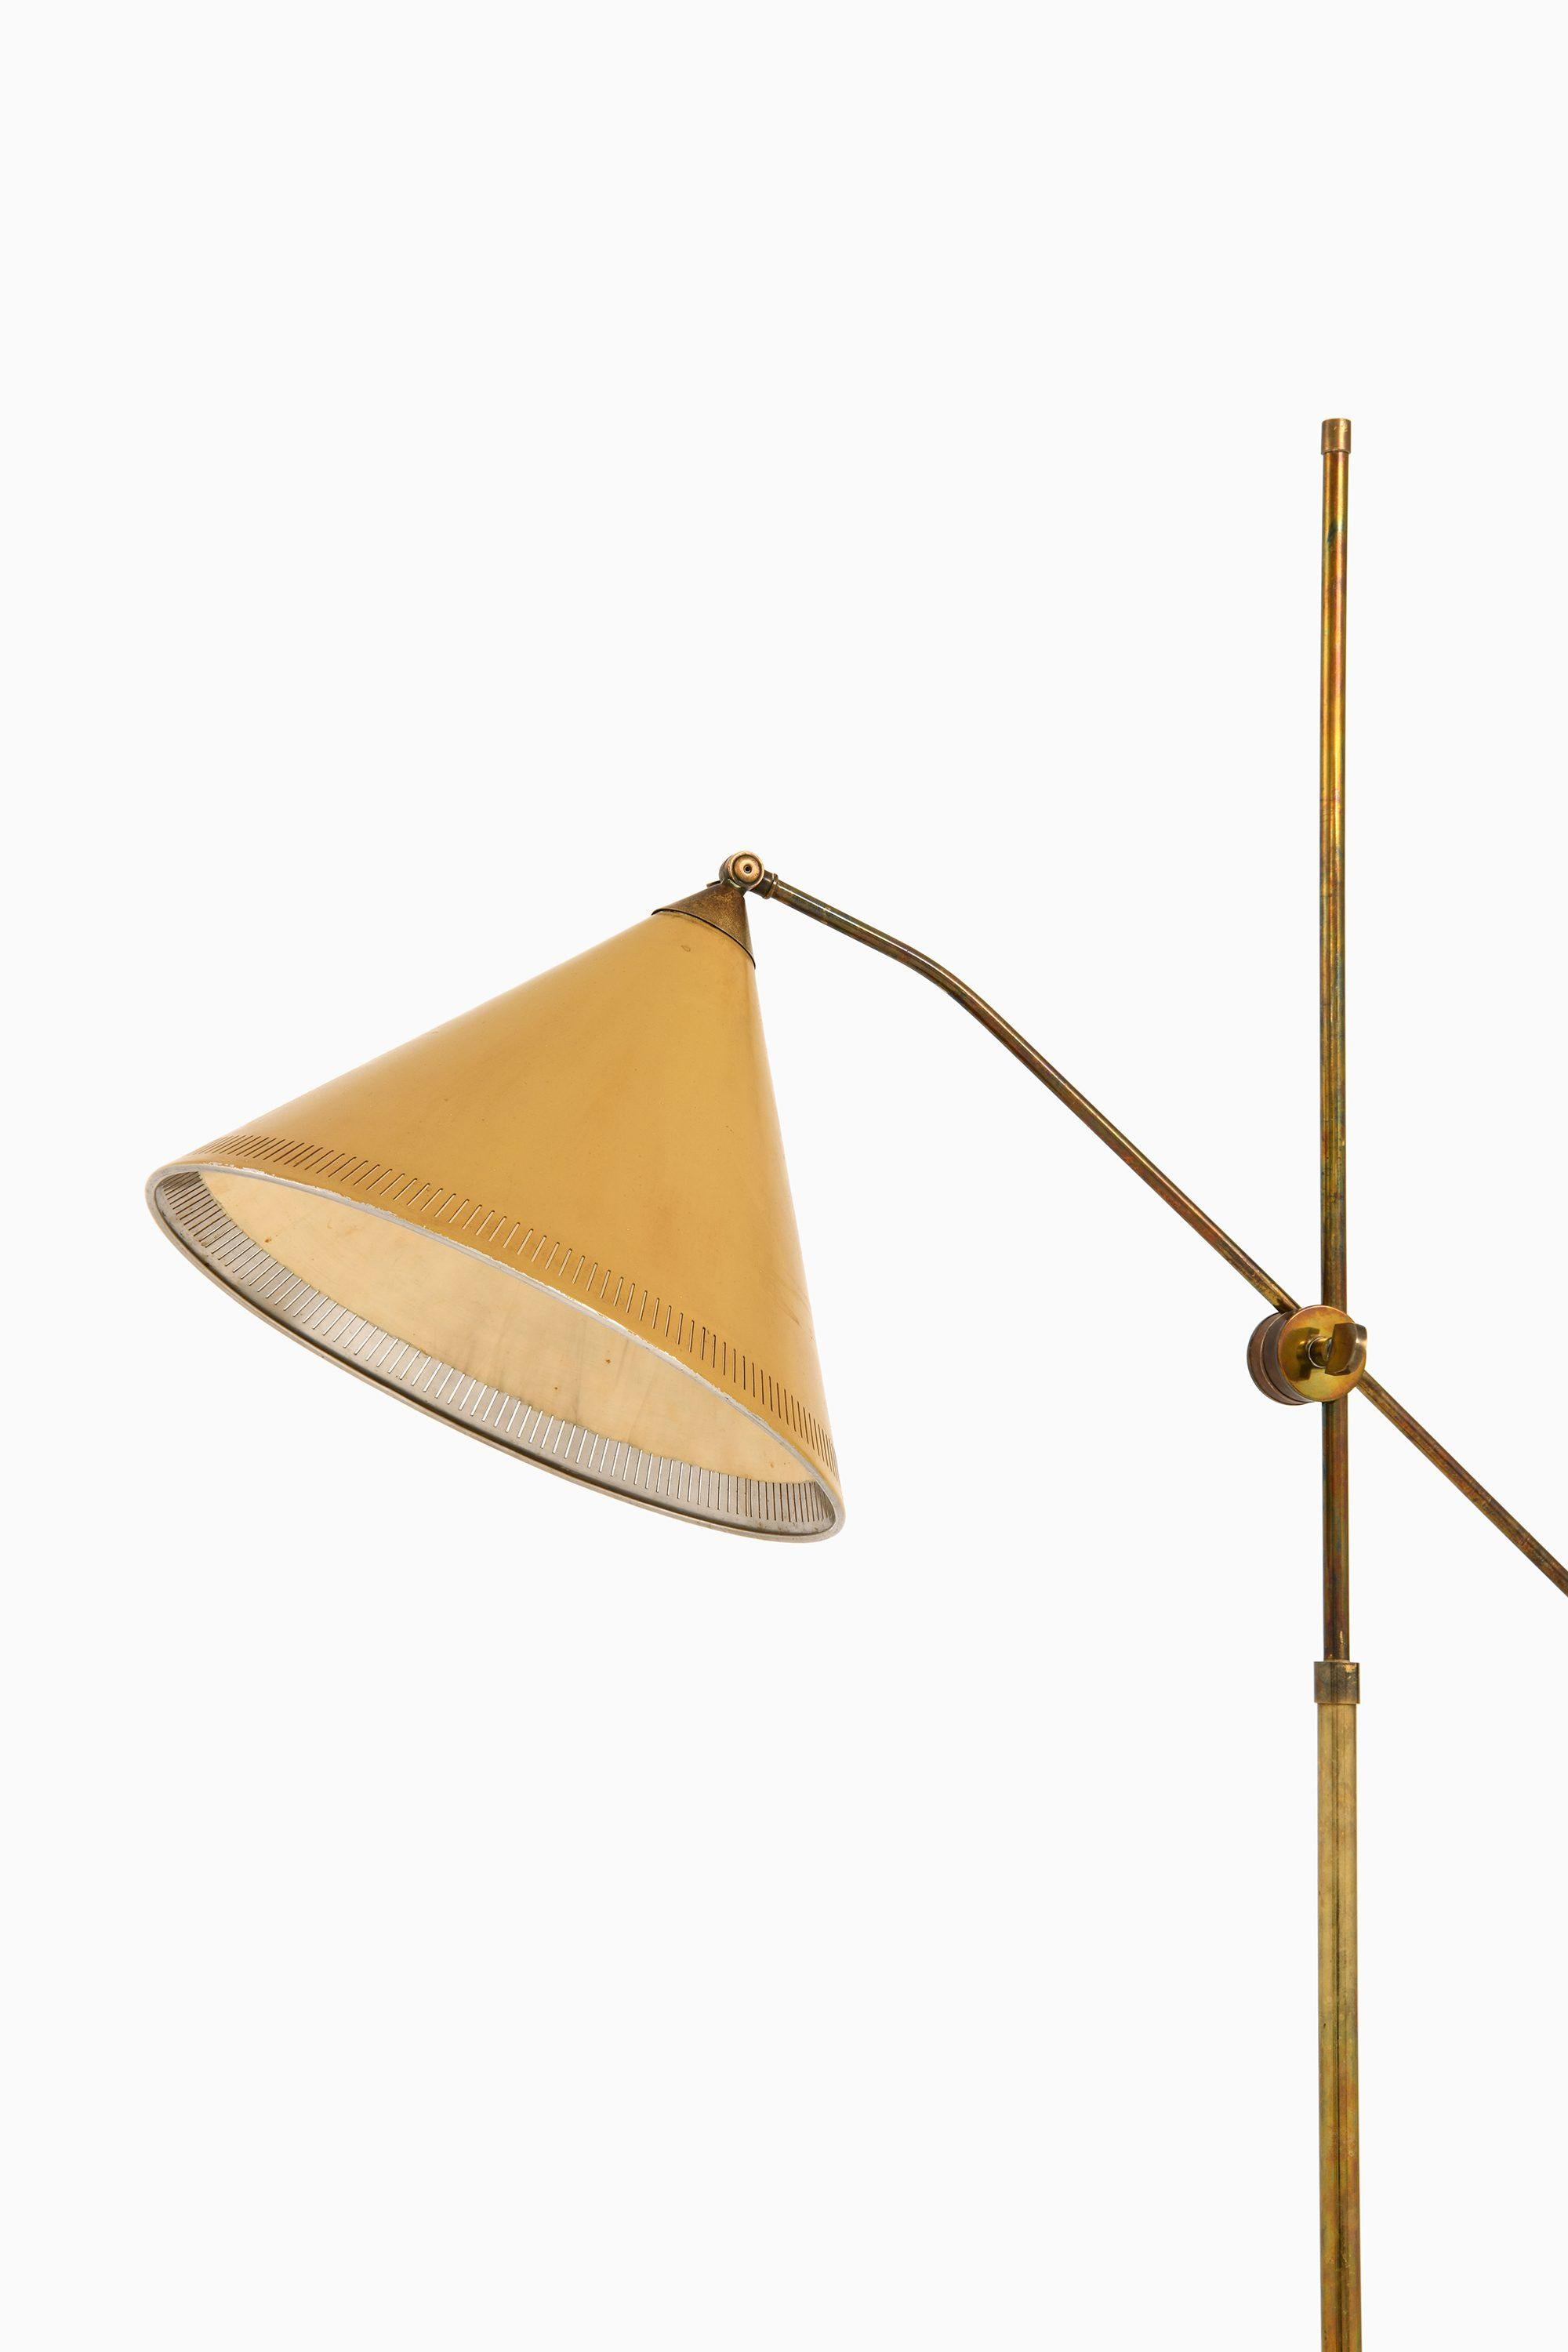 Rare Adjustable Floor Lamp in Brass and Original Yellow Lamp Shade, 1950's

Additional Information:
Material: Brass and original yellow lamp shade 
Style: Mid century, Scandinavian
Produced in Denmark
Dimensions (W x D x H): 35 x 85 x 166.5